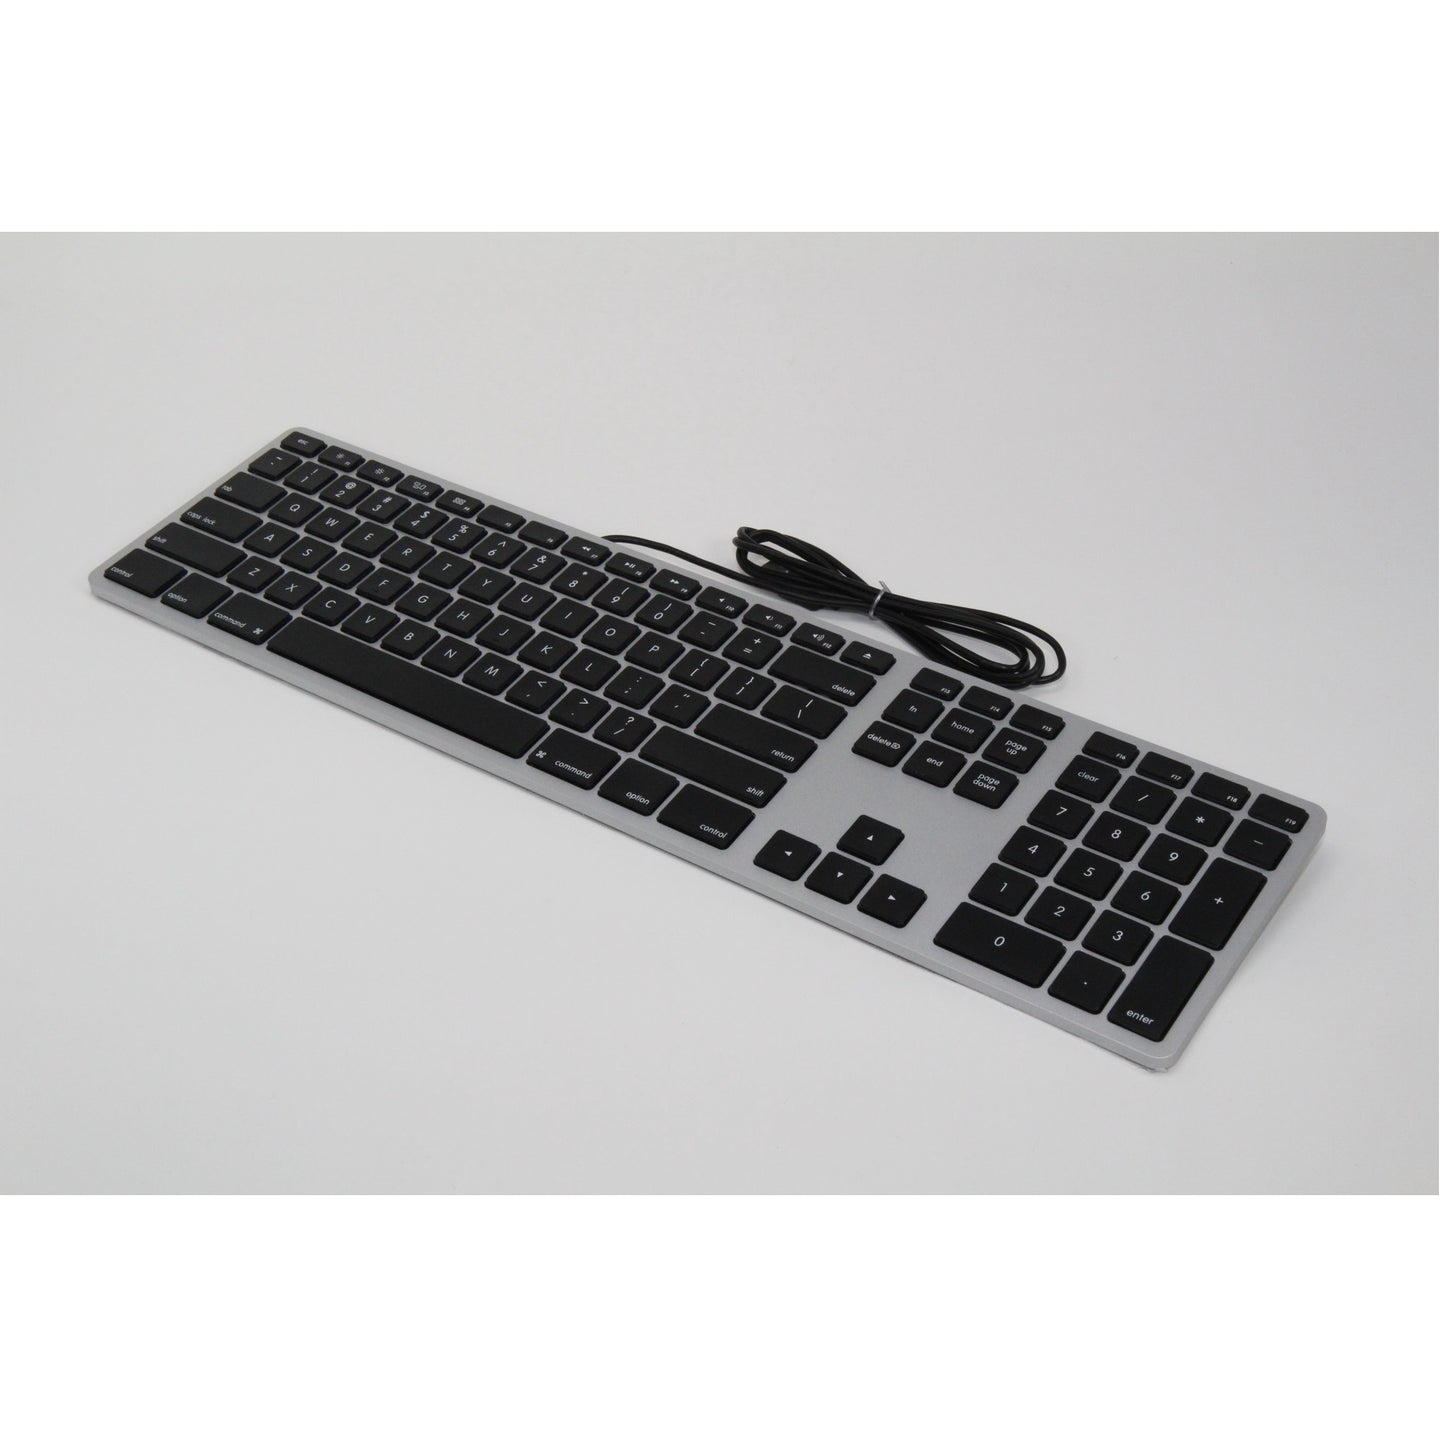 Wired Keyboard for Mac - Space Gray